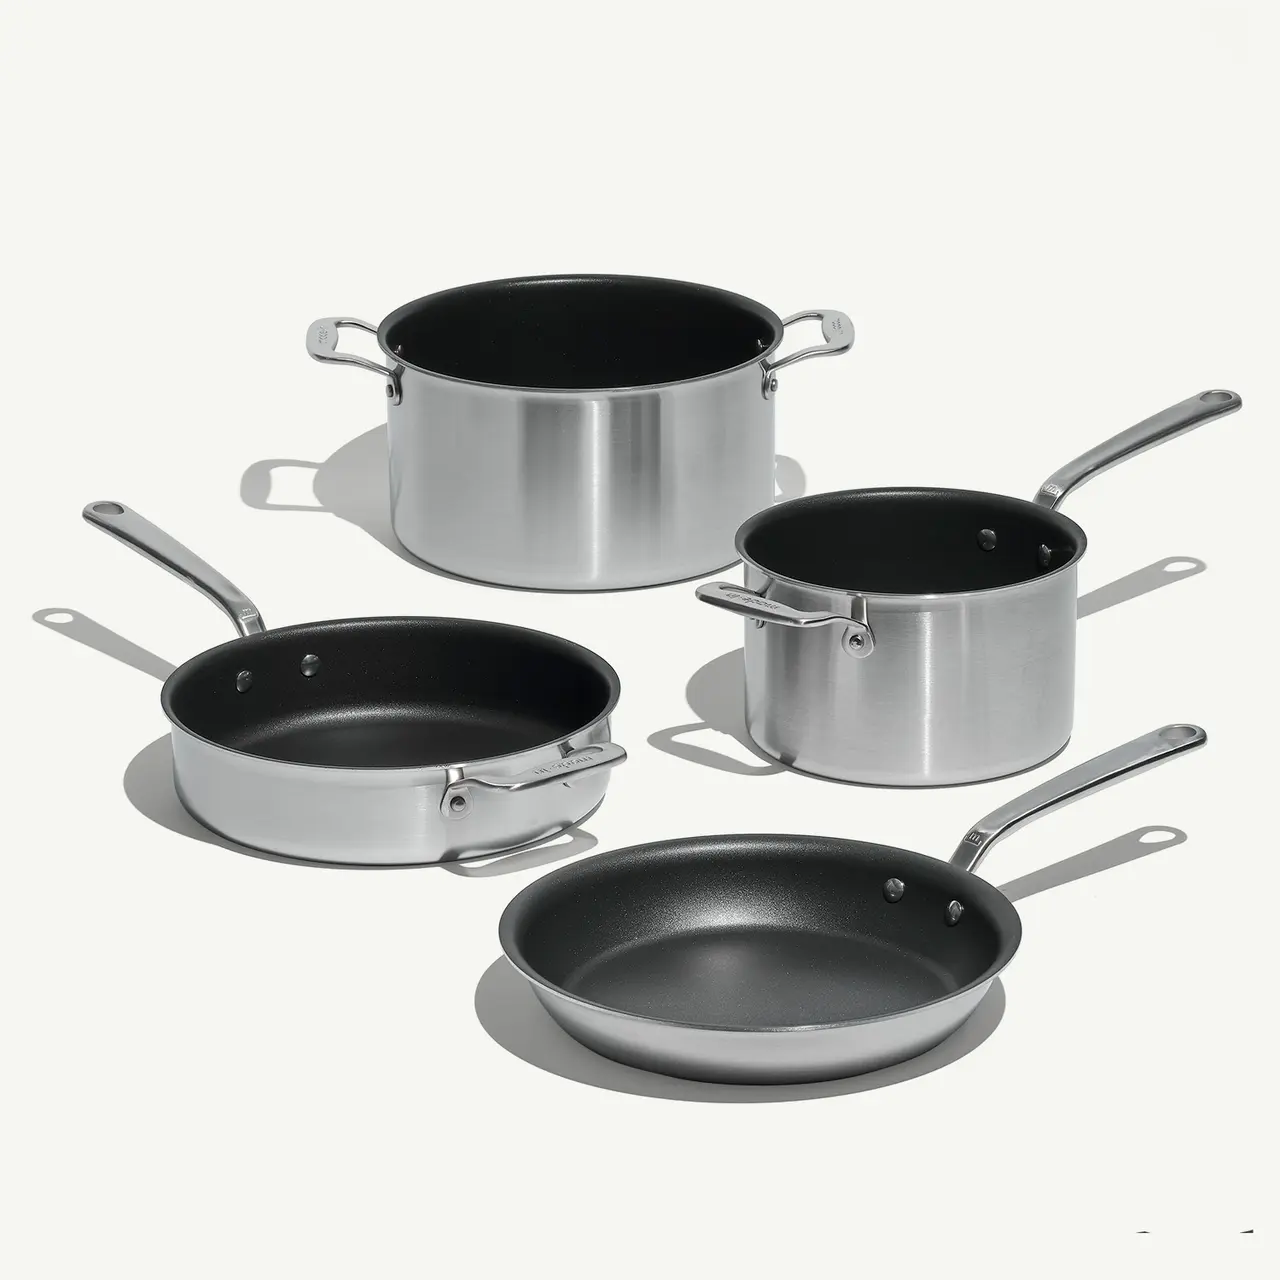 A set of stainless steel cookware, including two pots and two pans, is displayed on a white background.